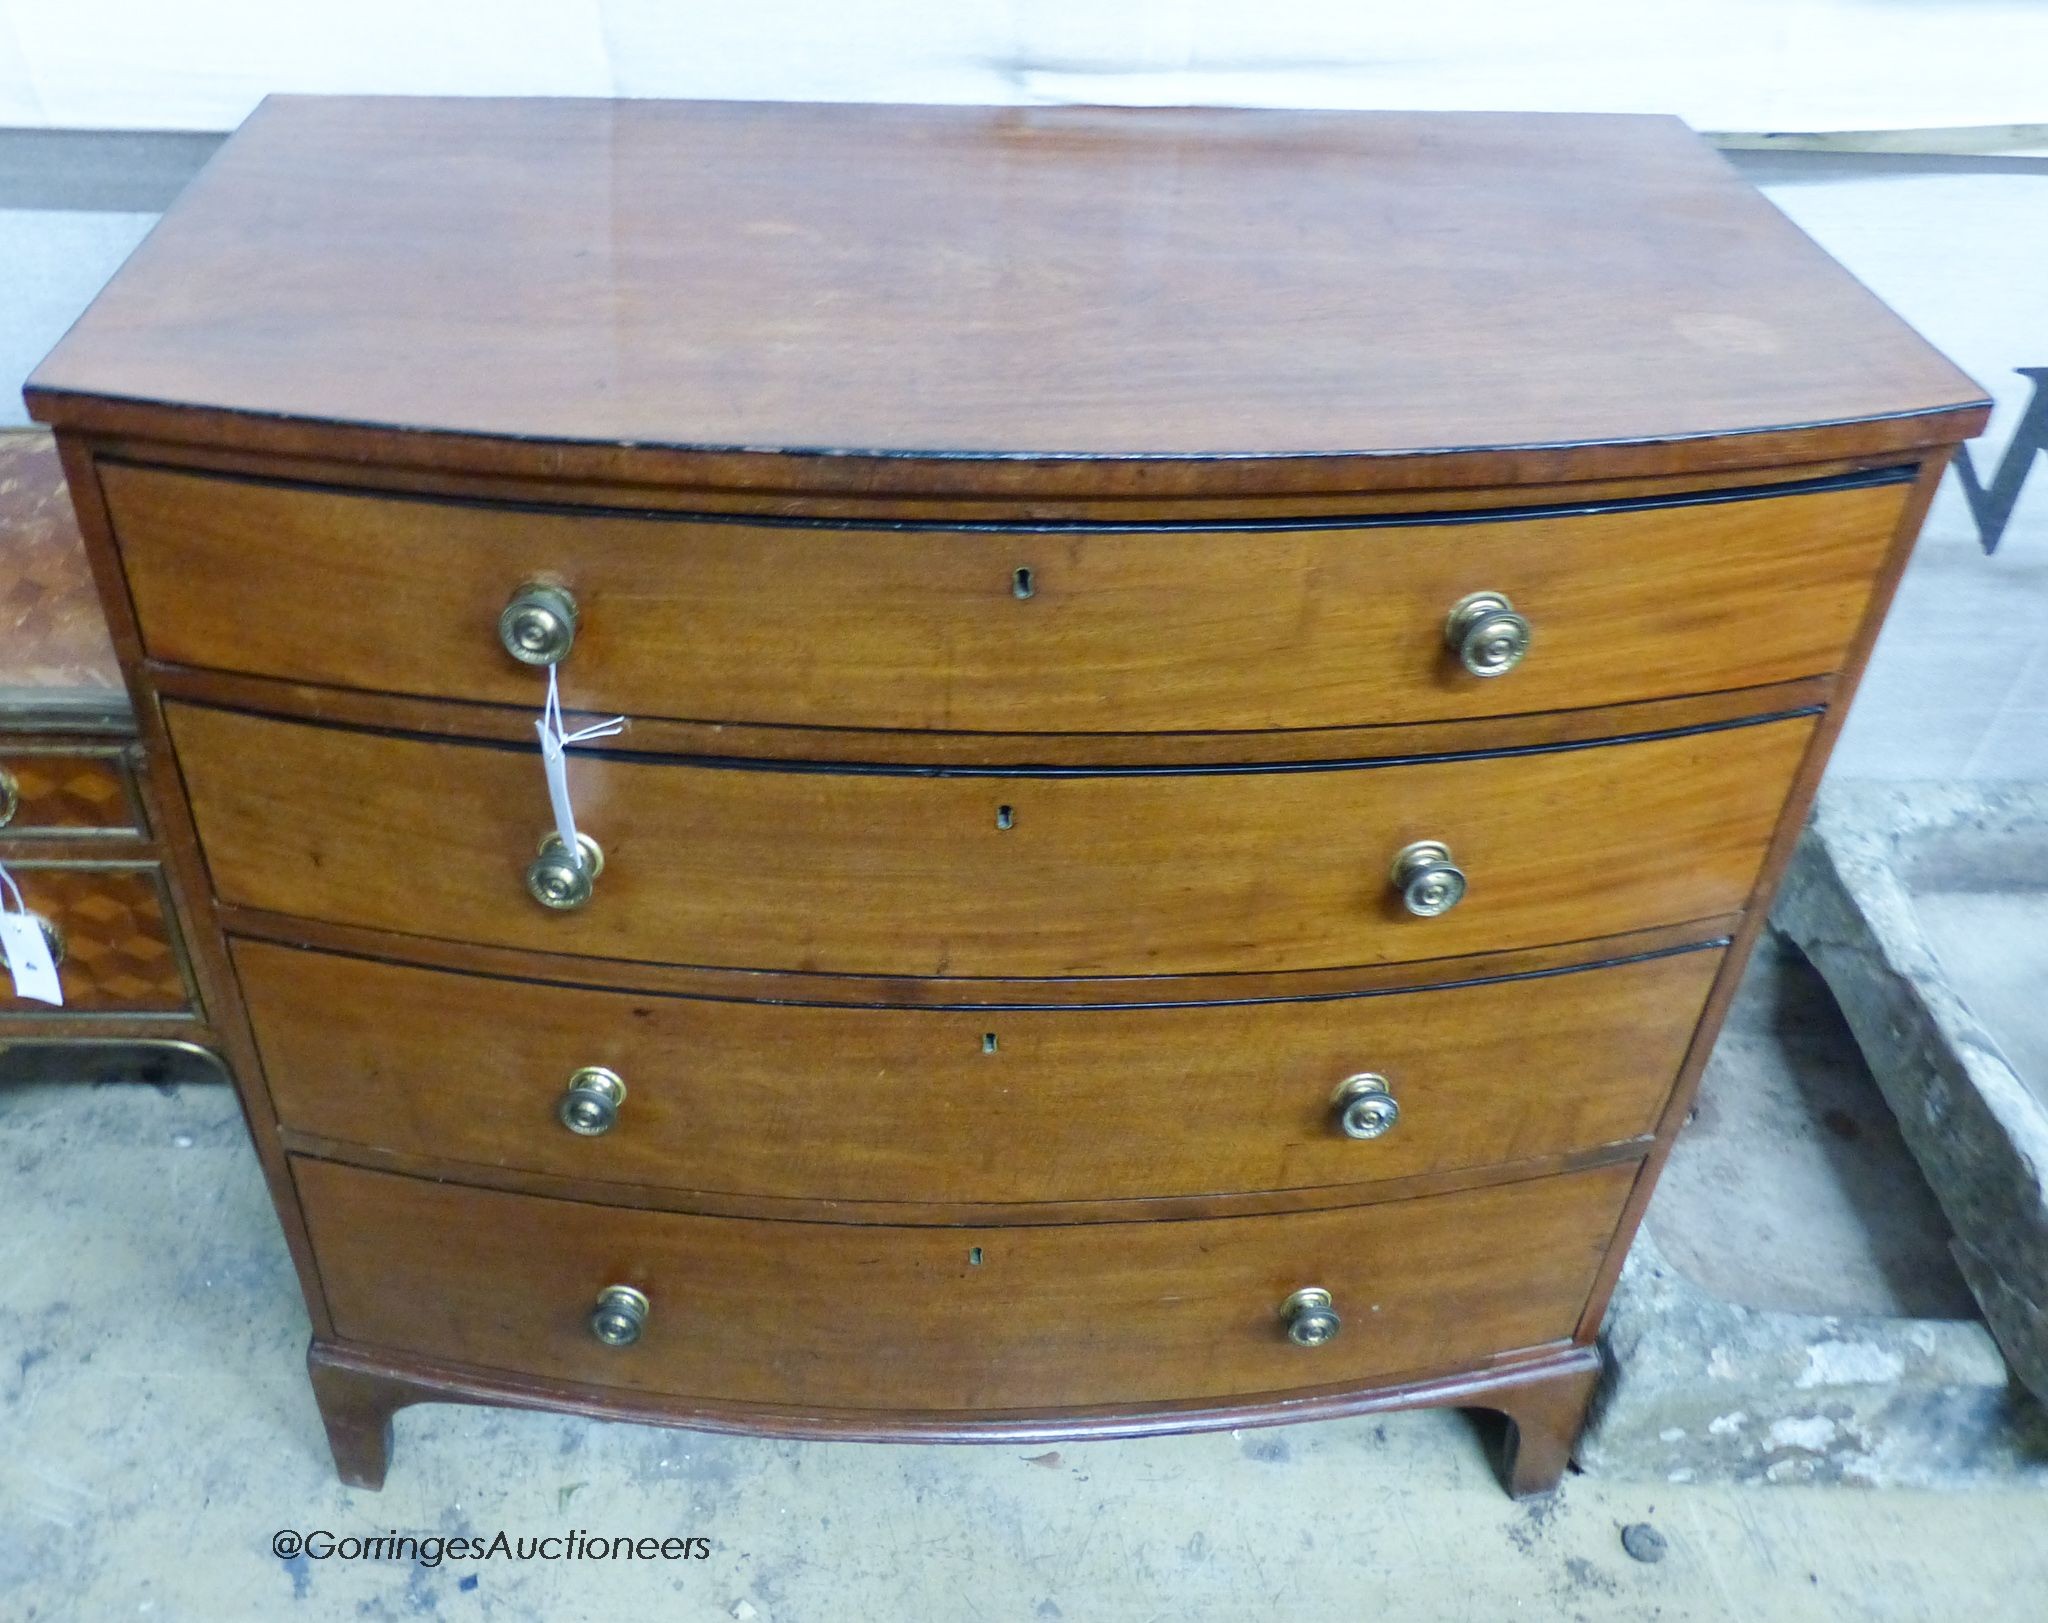 A Regency mahogany bow front chest of drawers, width 93cm, depth 49cm, height 91cm